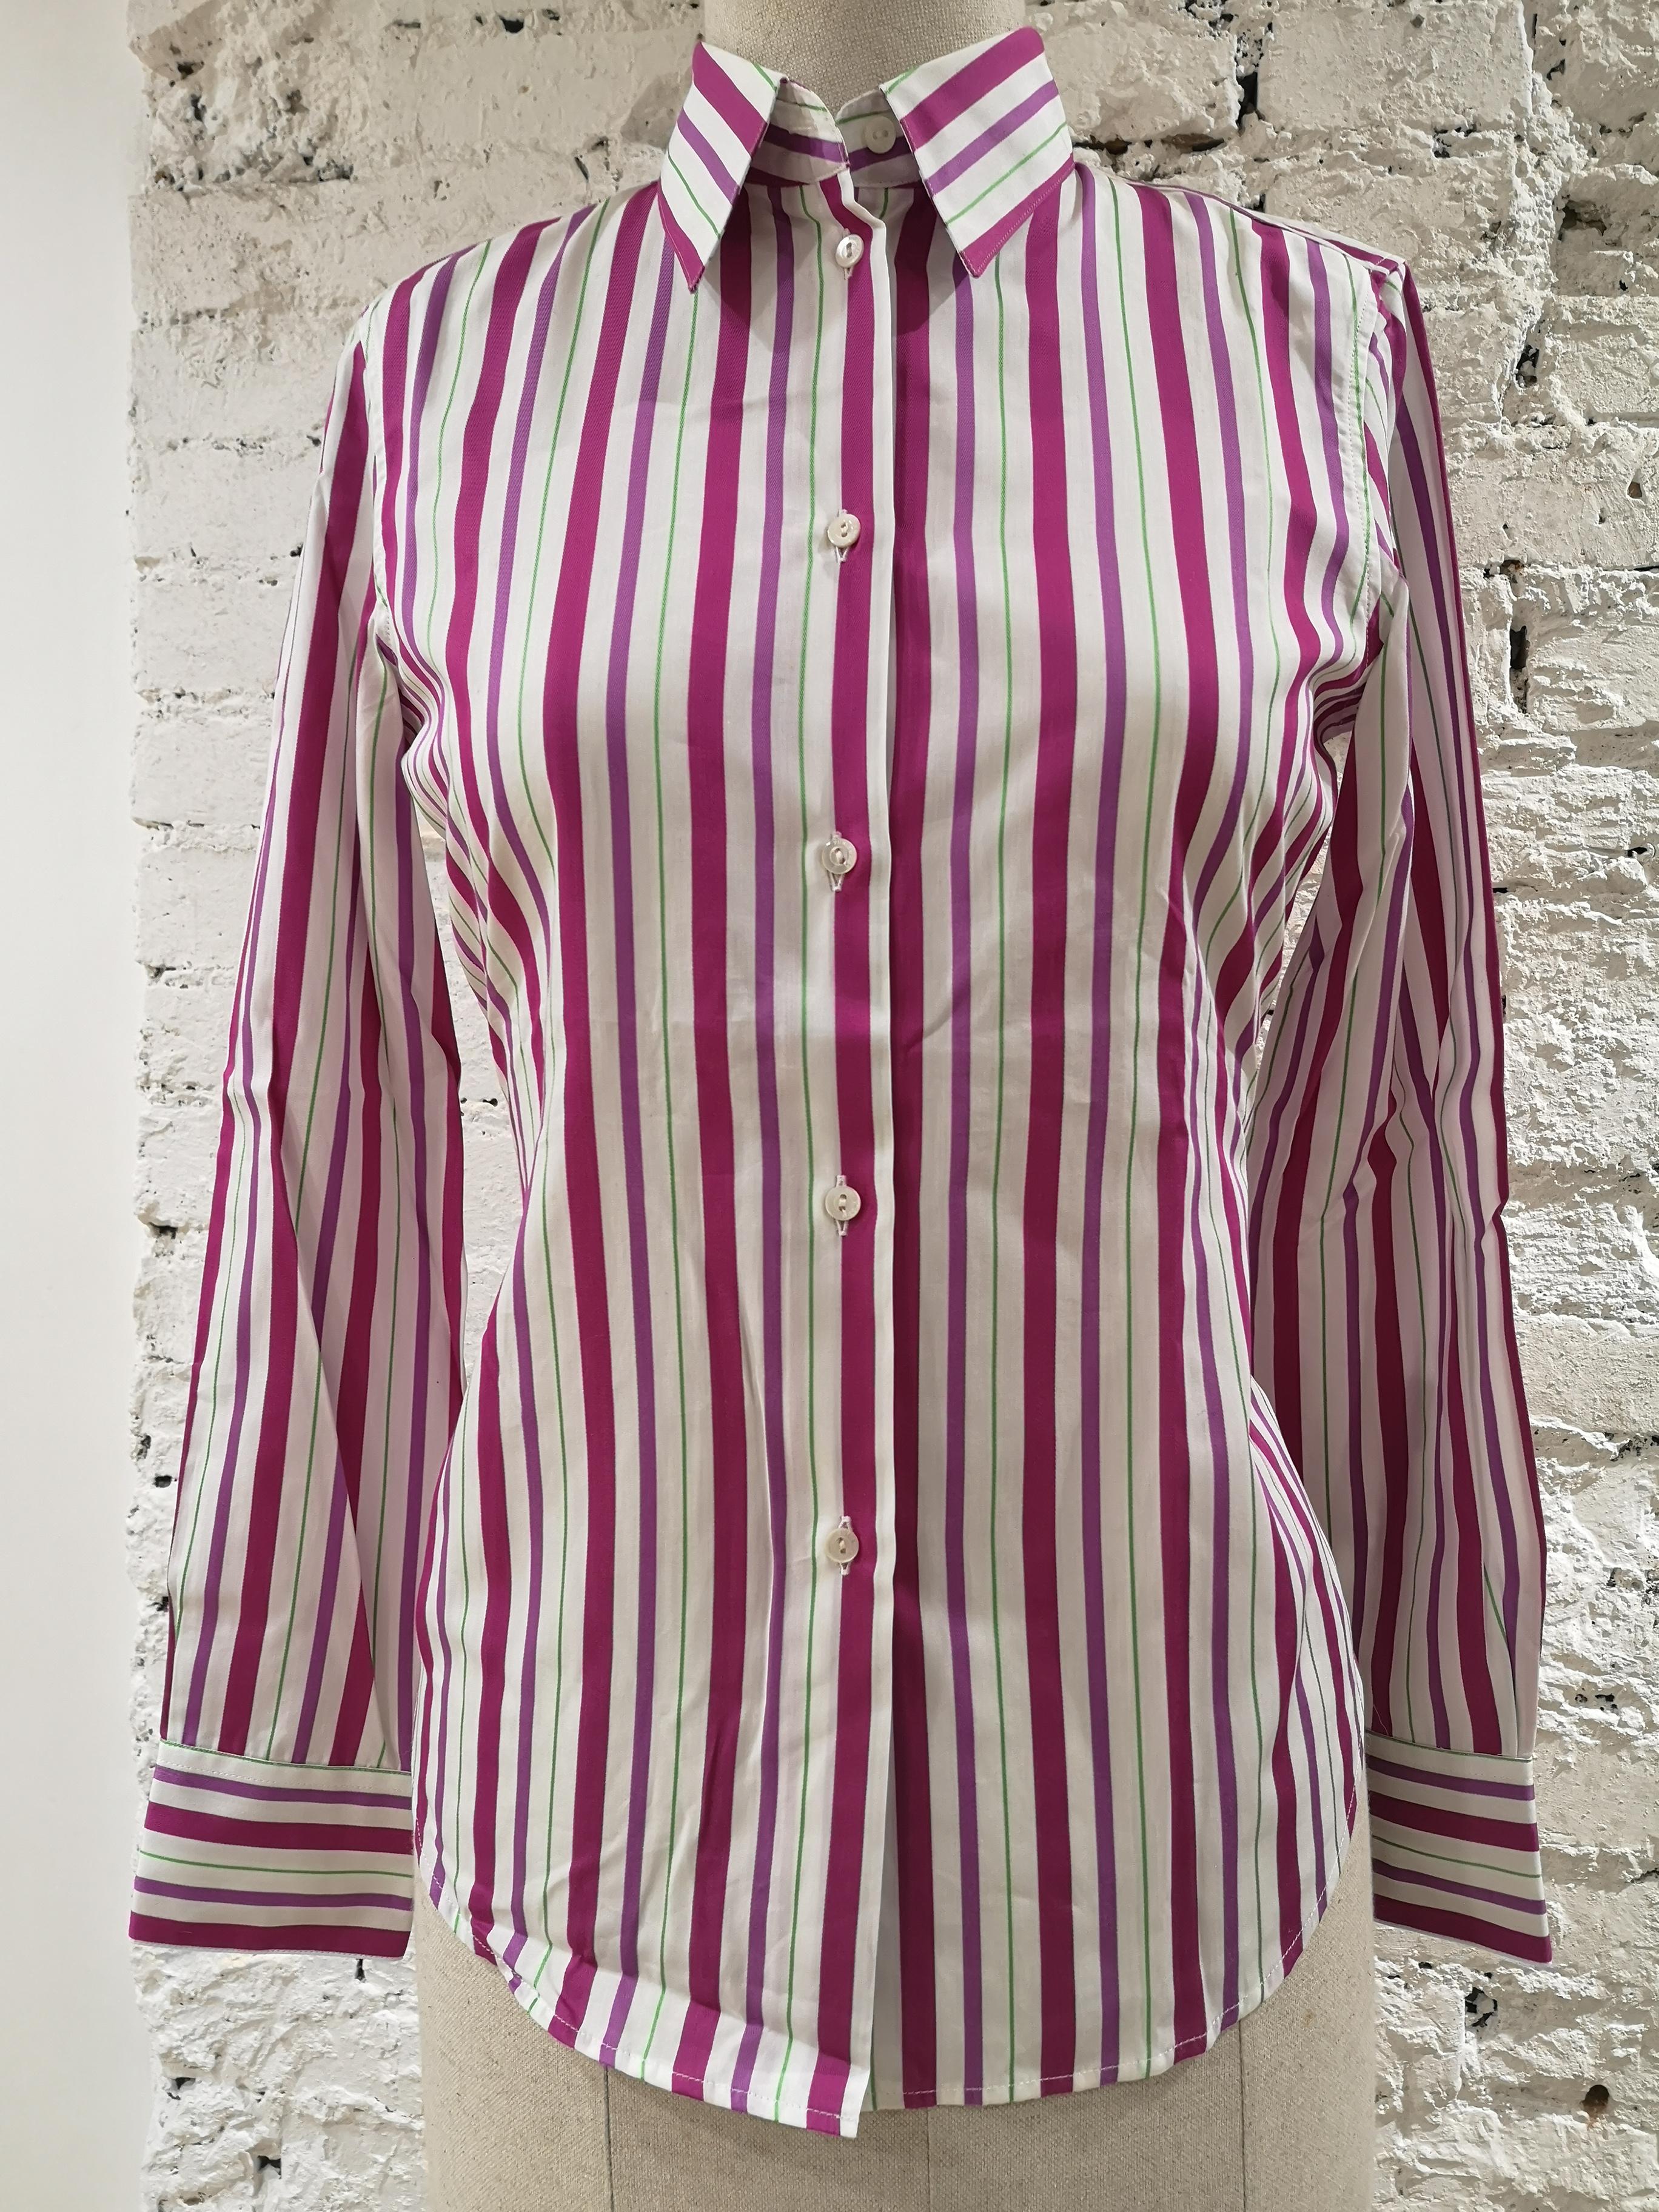 Loro Piana White Fucsia Shirt
totally made in italy in size 38 Composition: 100% Cotton